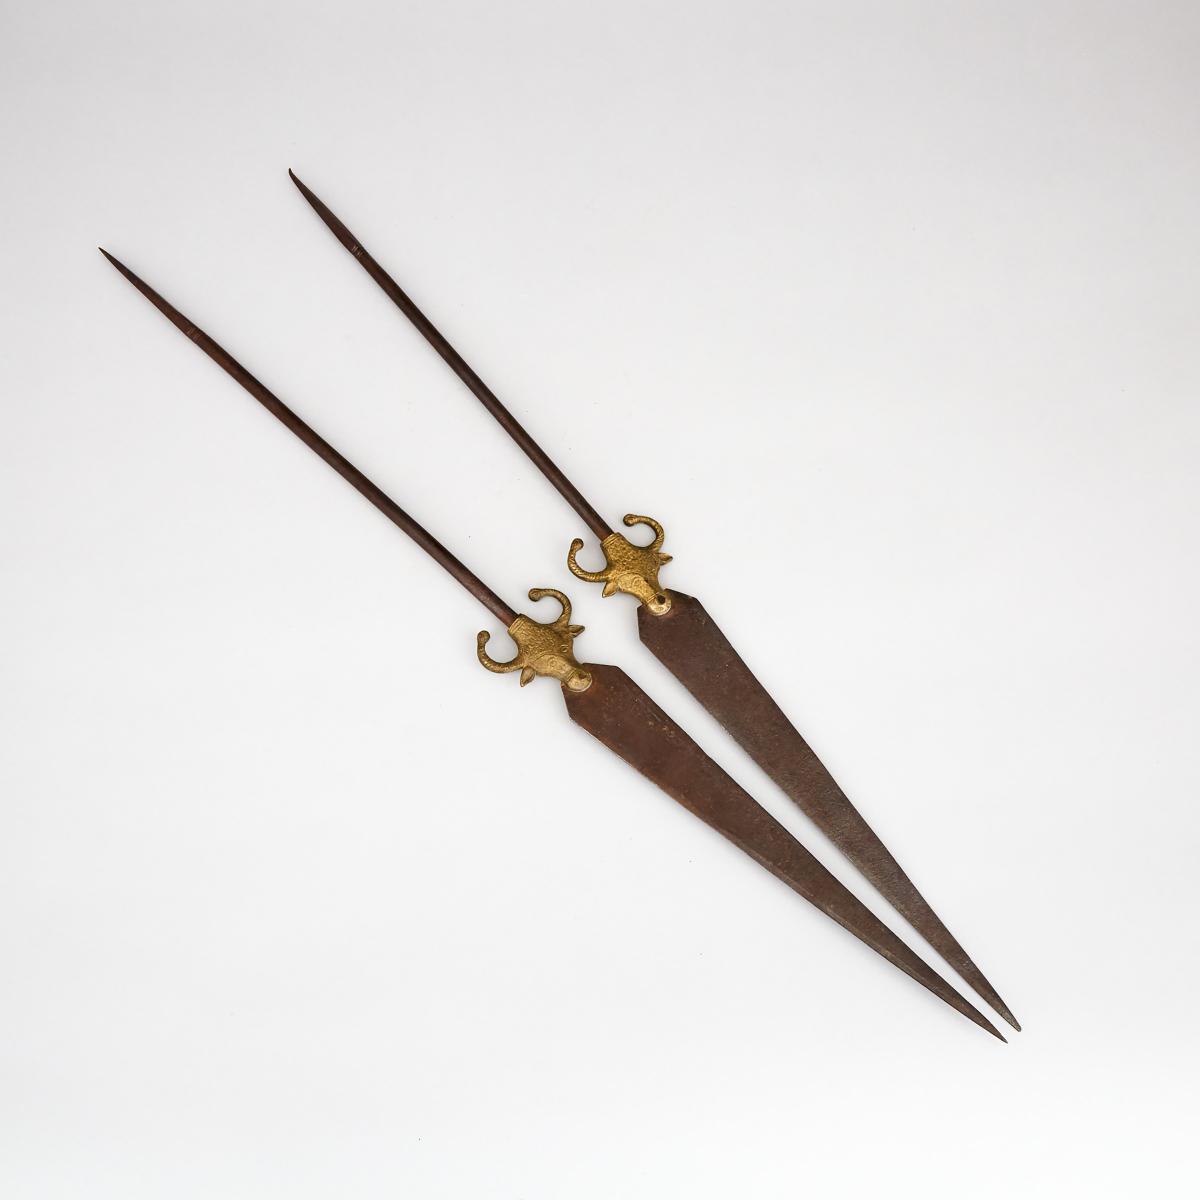 Pair of Bronze Bull Head Mounted Iron Lances/Skewers, early 20th century, length 26 in — 66 cm (2 Pi